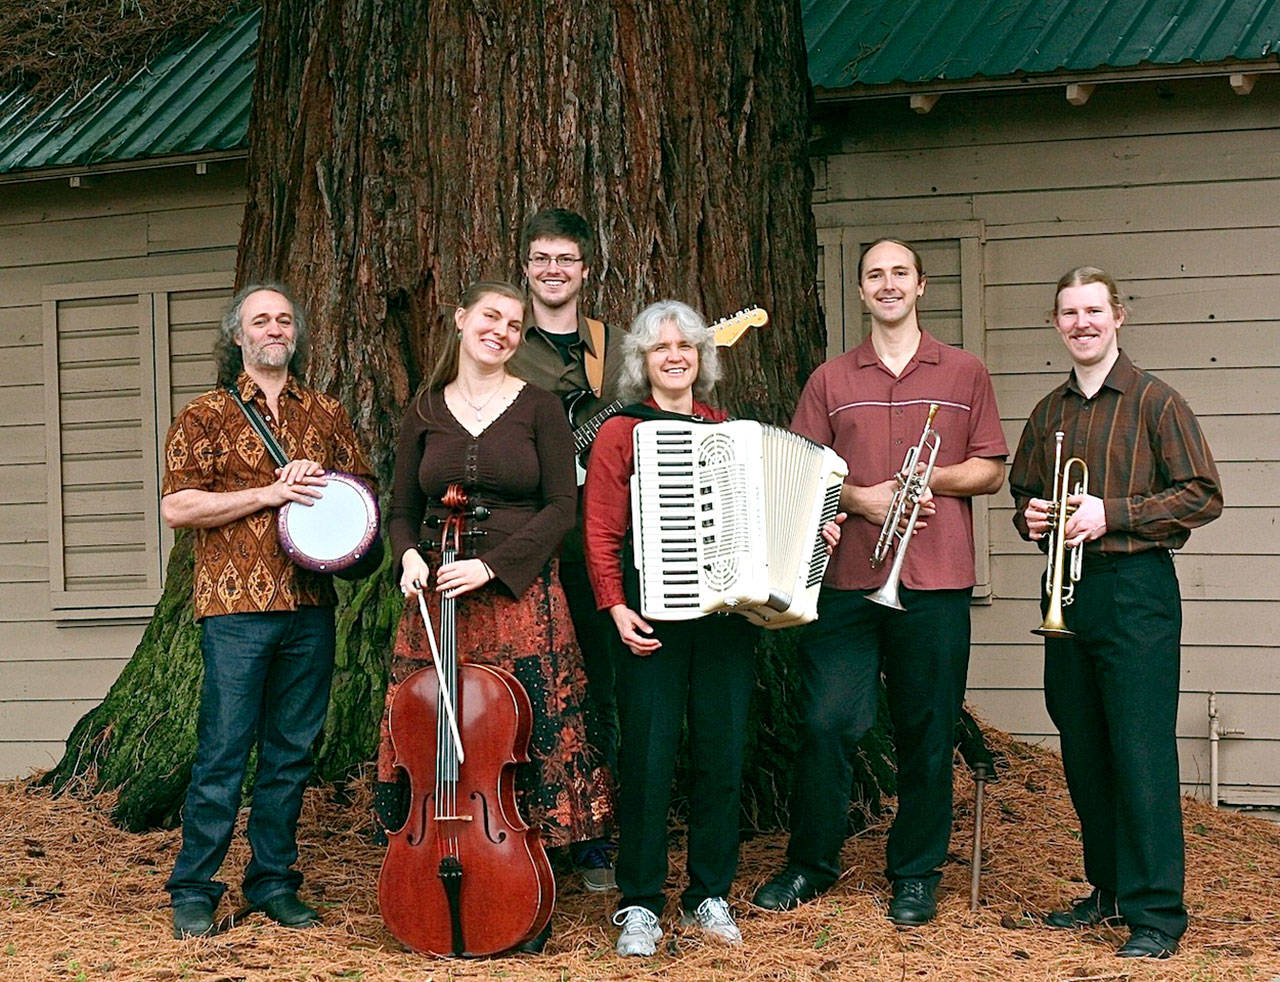 Kef, a Balkan dance band from Eugene, Ore., will perform at a Balkan folk music dance at the Palindrome, 1893 S. Jacob Miller Road in Port Townsend, from 7 p.m. to 10 p.m. Sunday.